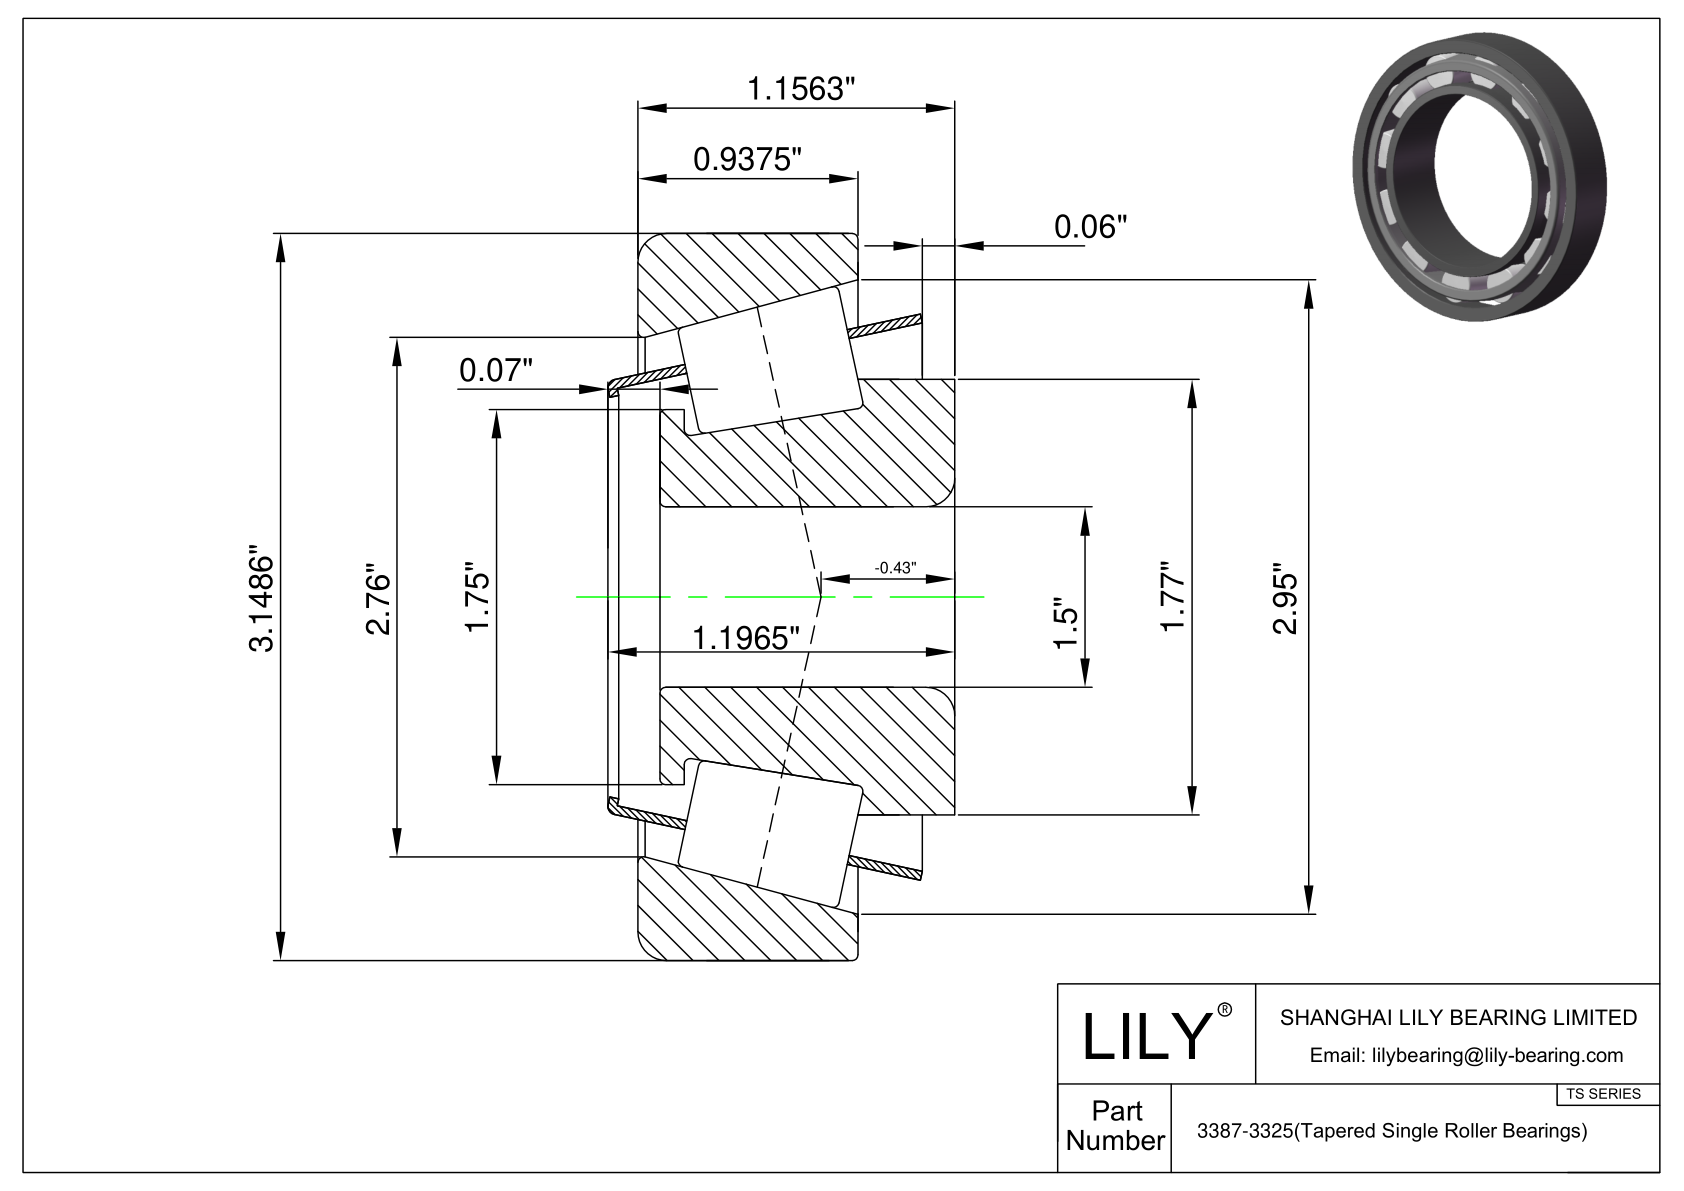 3387-3325 TS (Tapered Single Roller Bearings) (Imperial) cad drawing